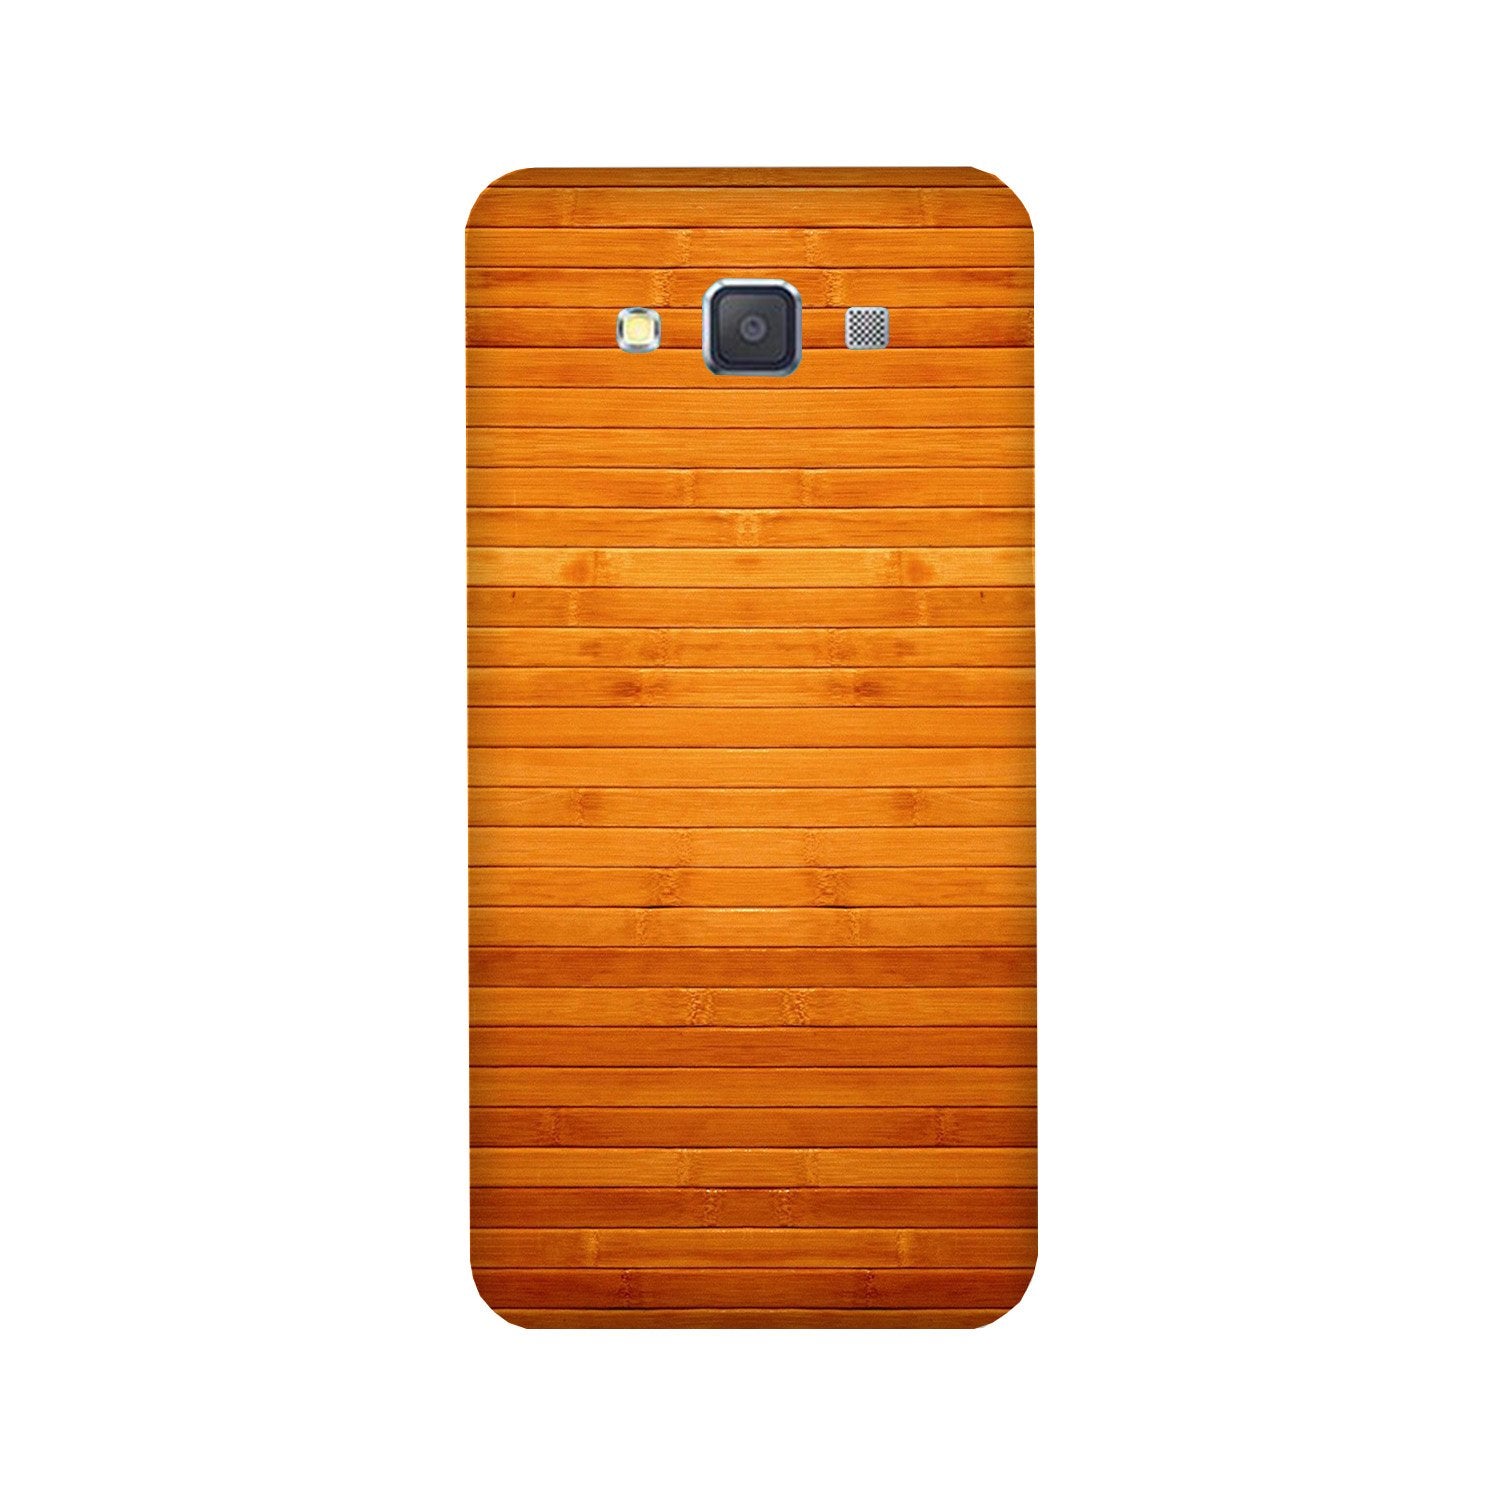 Wooden Look Case for Galaxy Grand Max  (Design - 111)